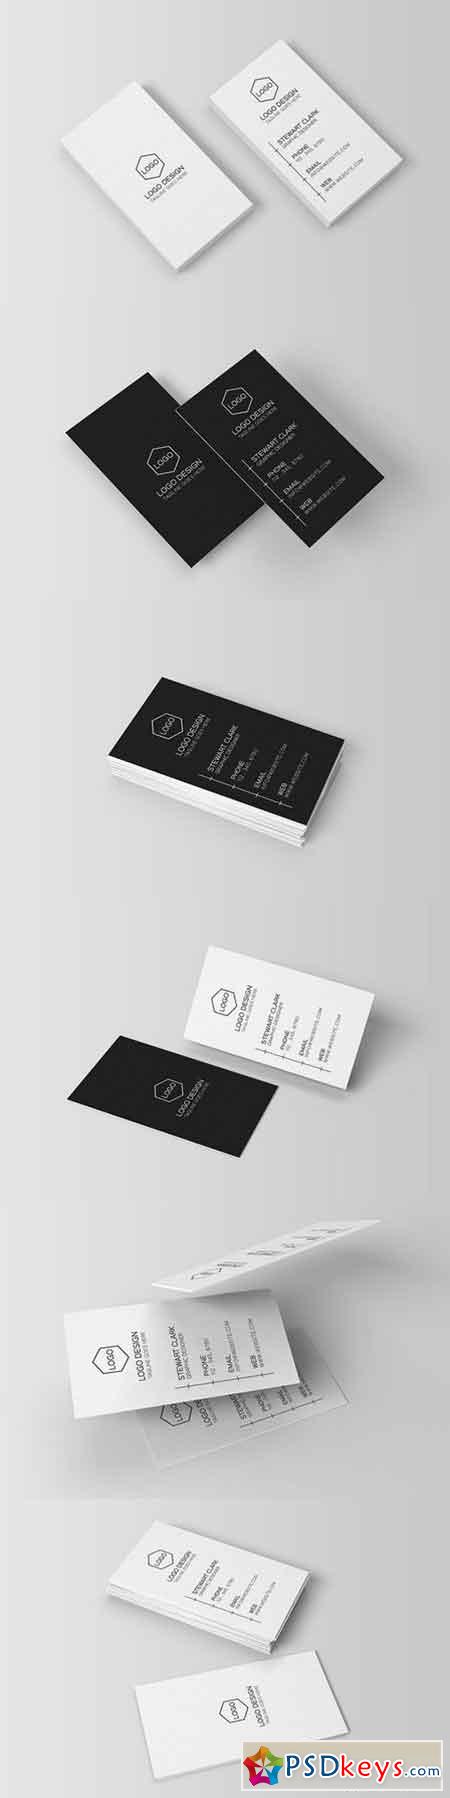 Clean Minimal Business Card Template 393498